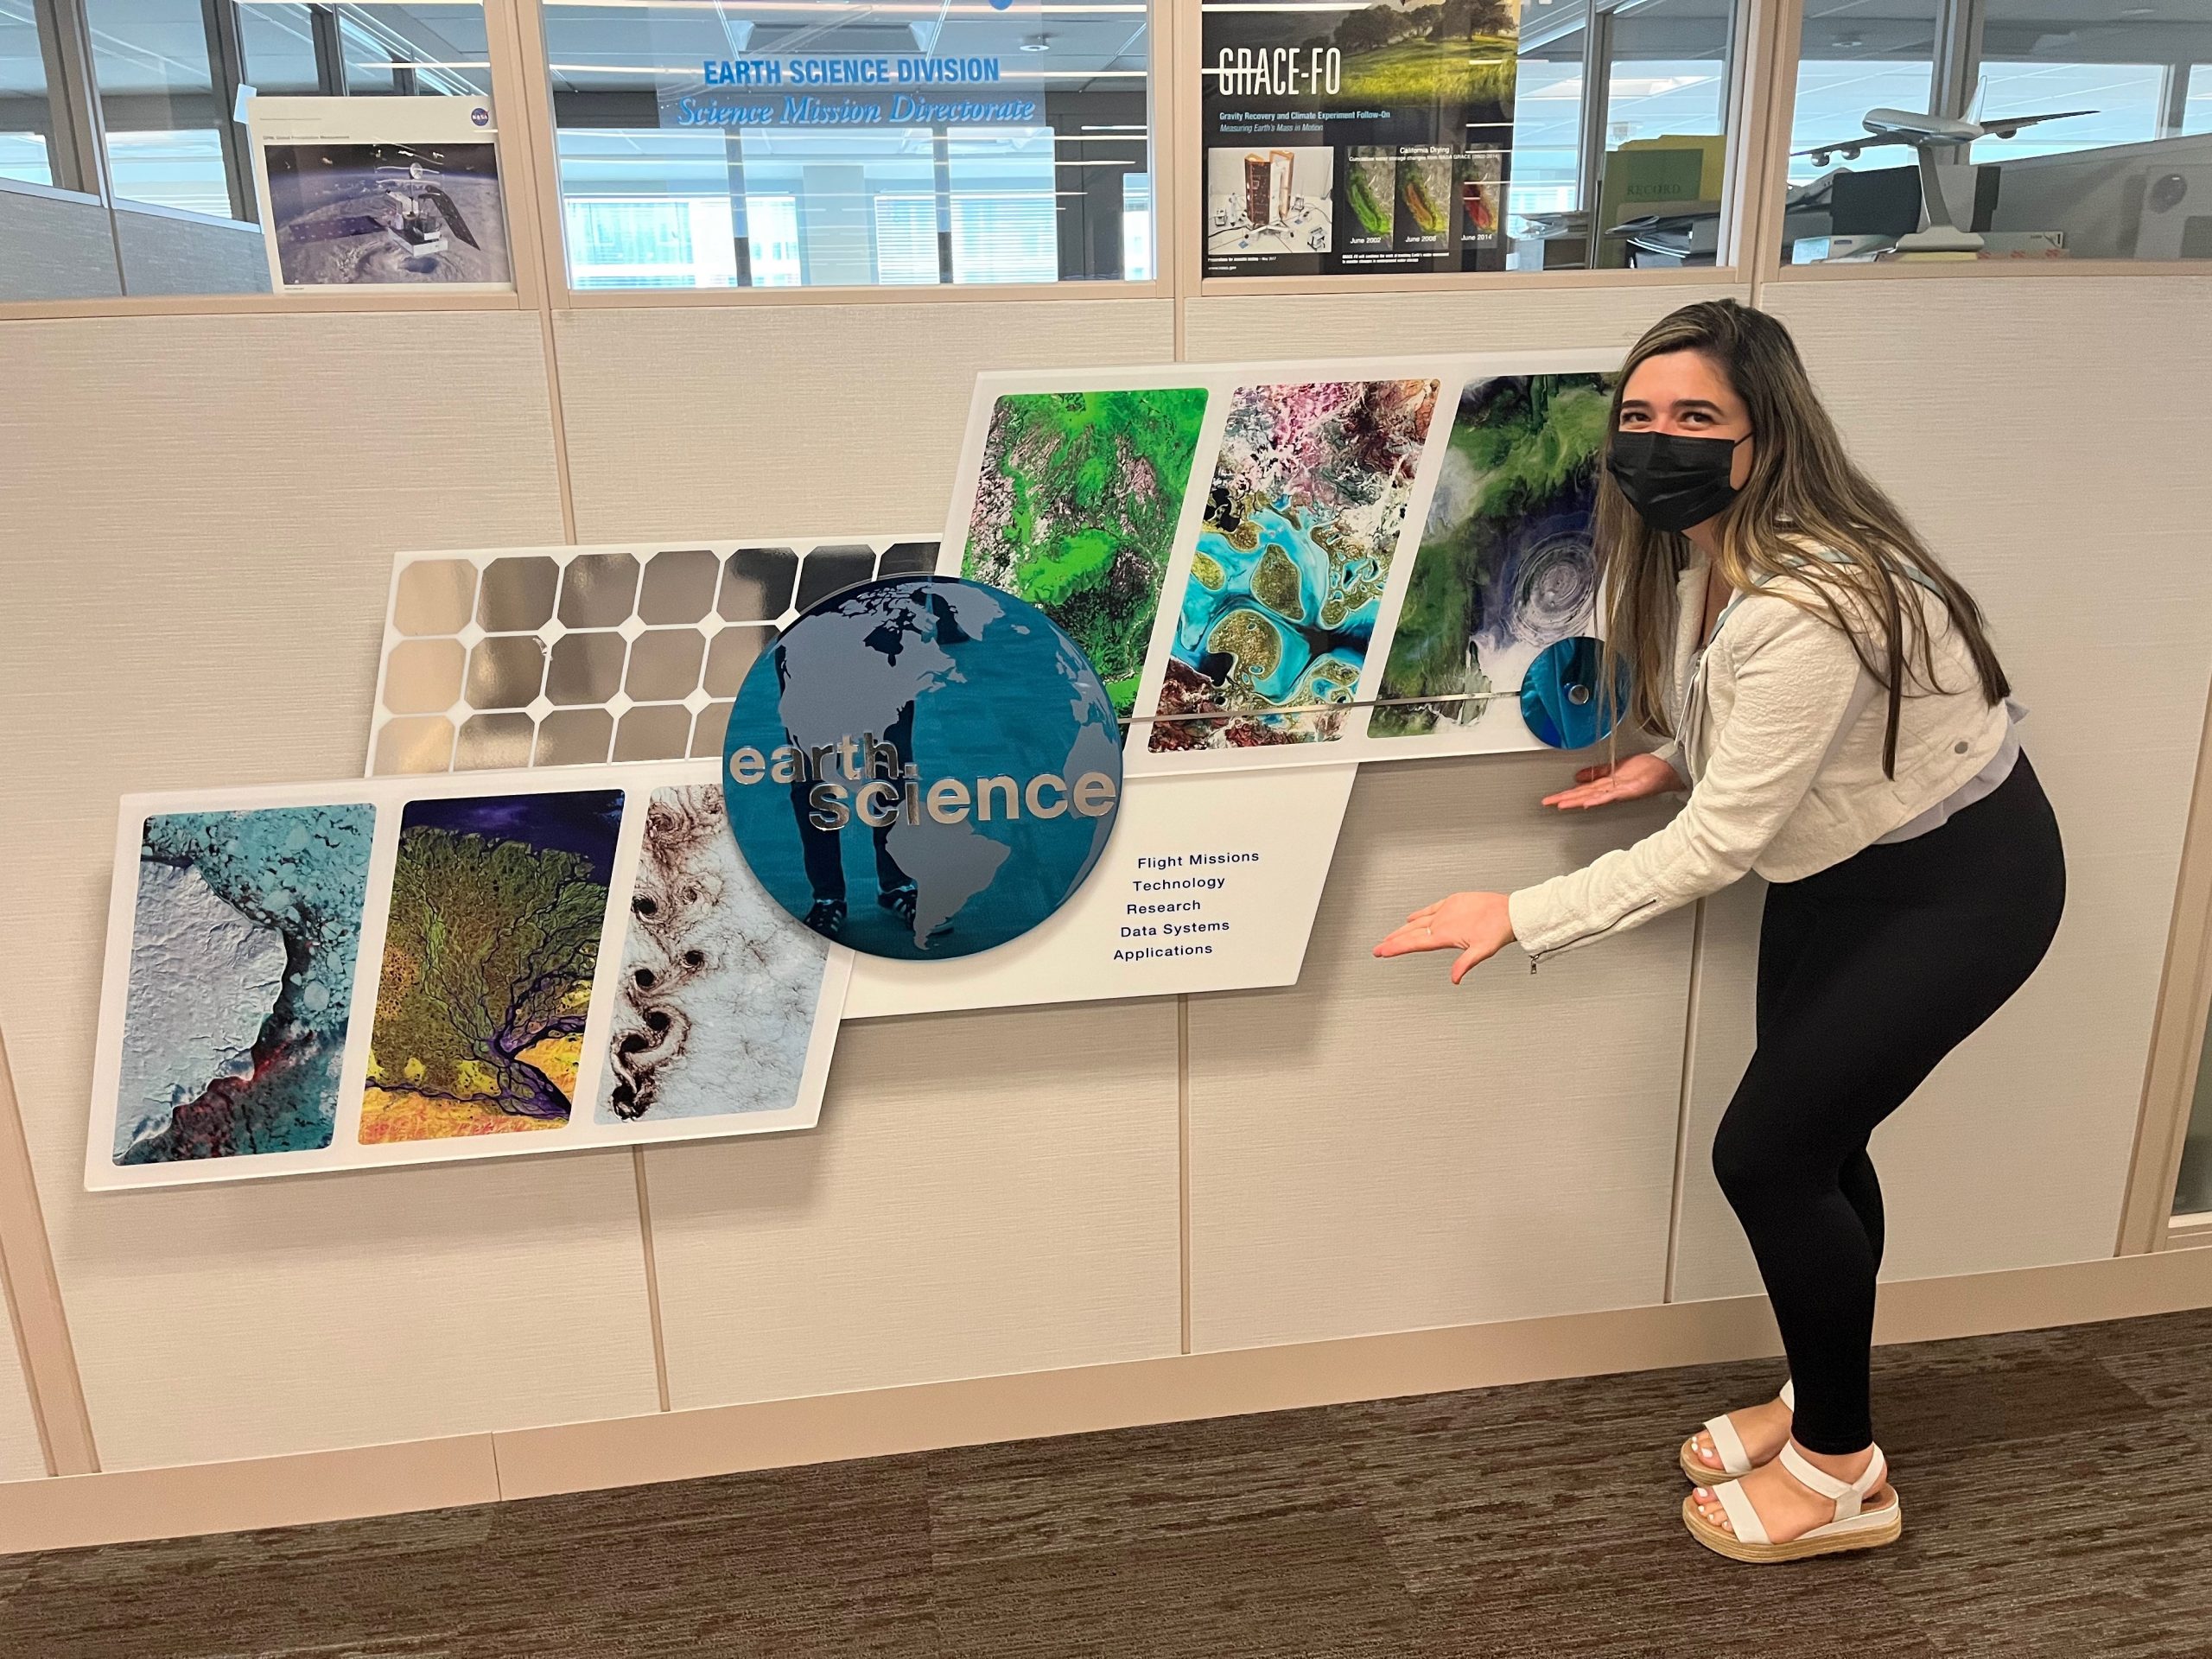 Mia, a NASA intern, stands in the office at NASA HQ, pointing at the Earth Science Division sign. She's dressed casually in a denim jacket, leggings and sandals.